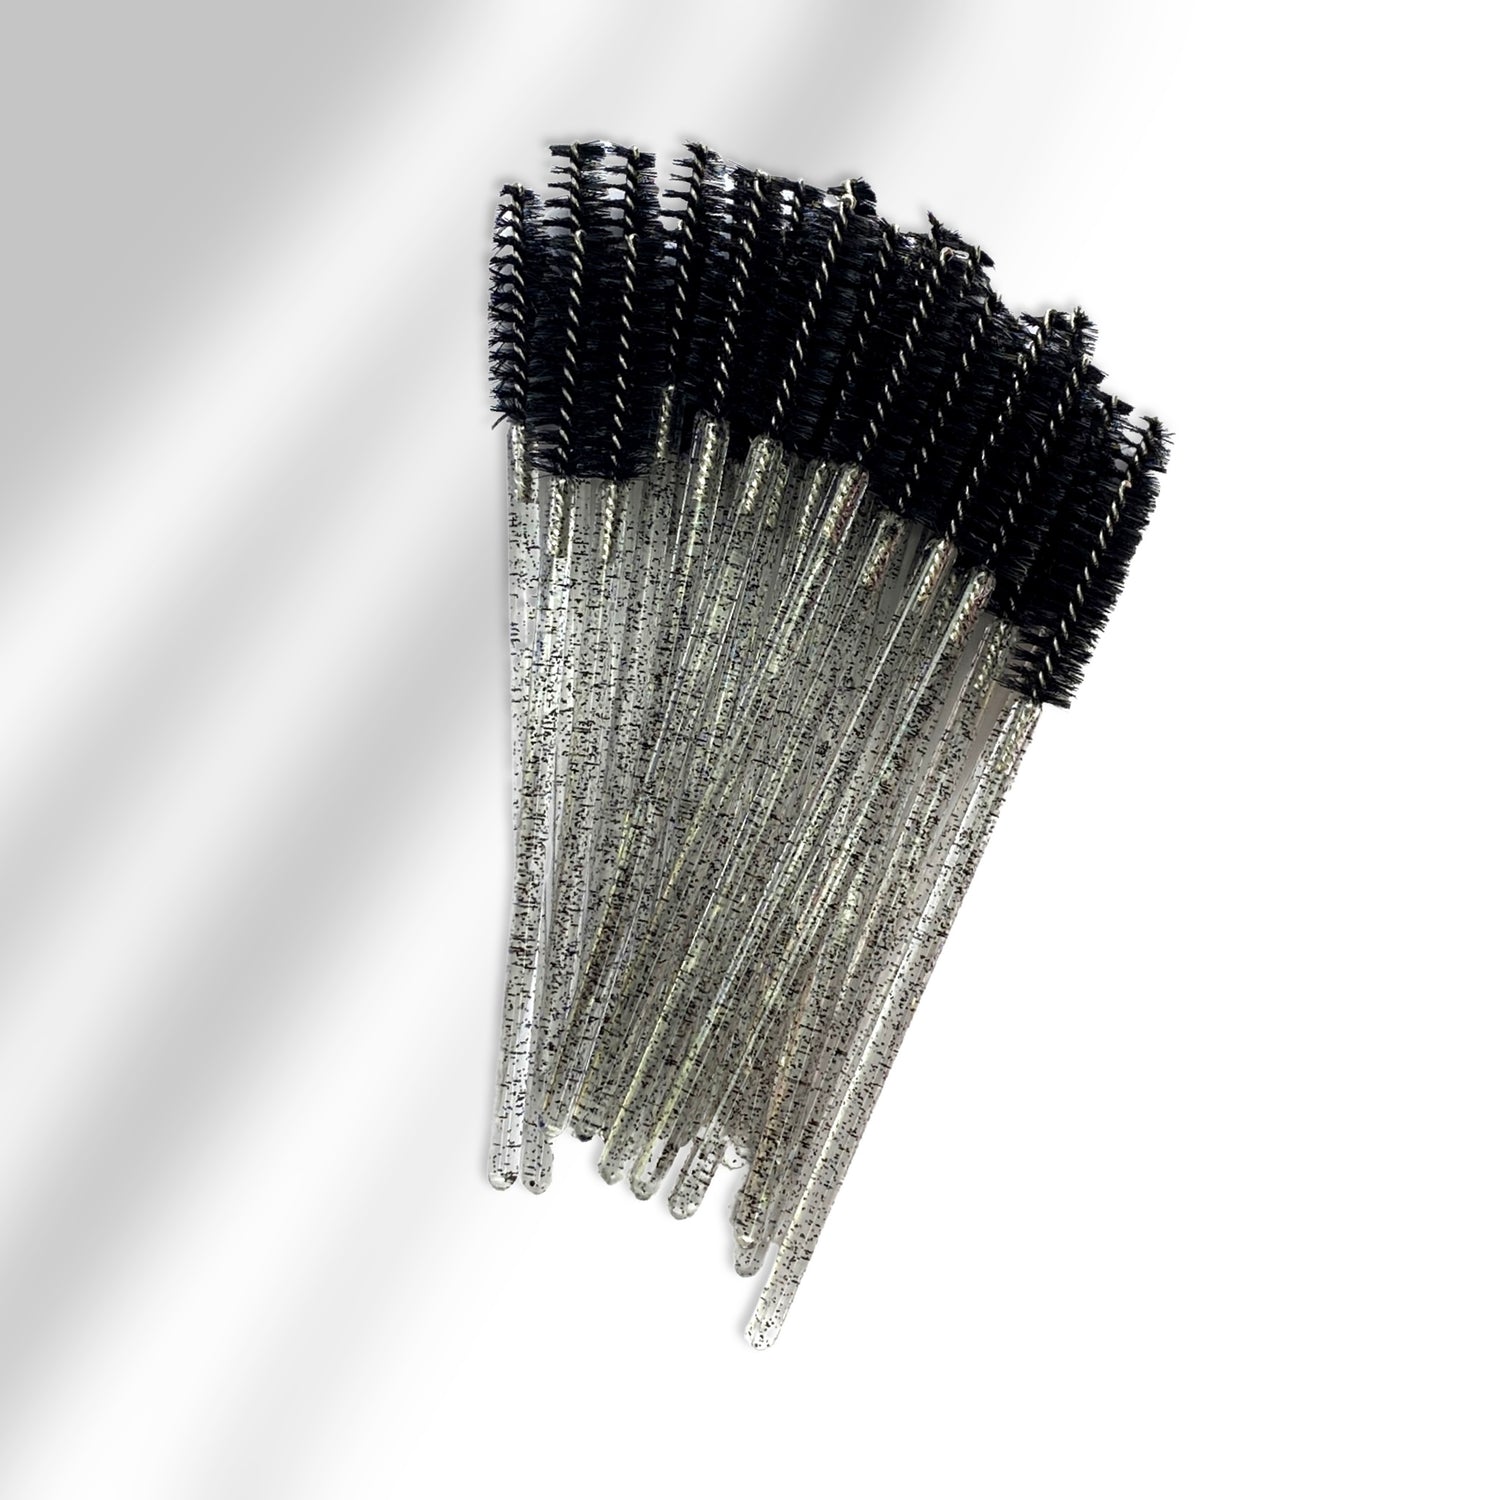 A stack of black and clear glittered spoolies with black bristle head. 